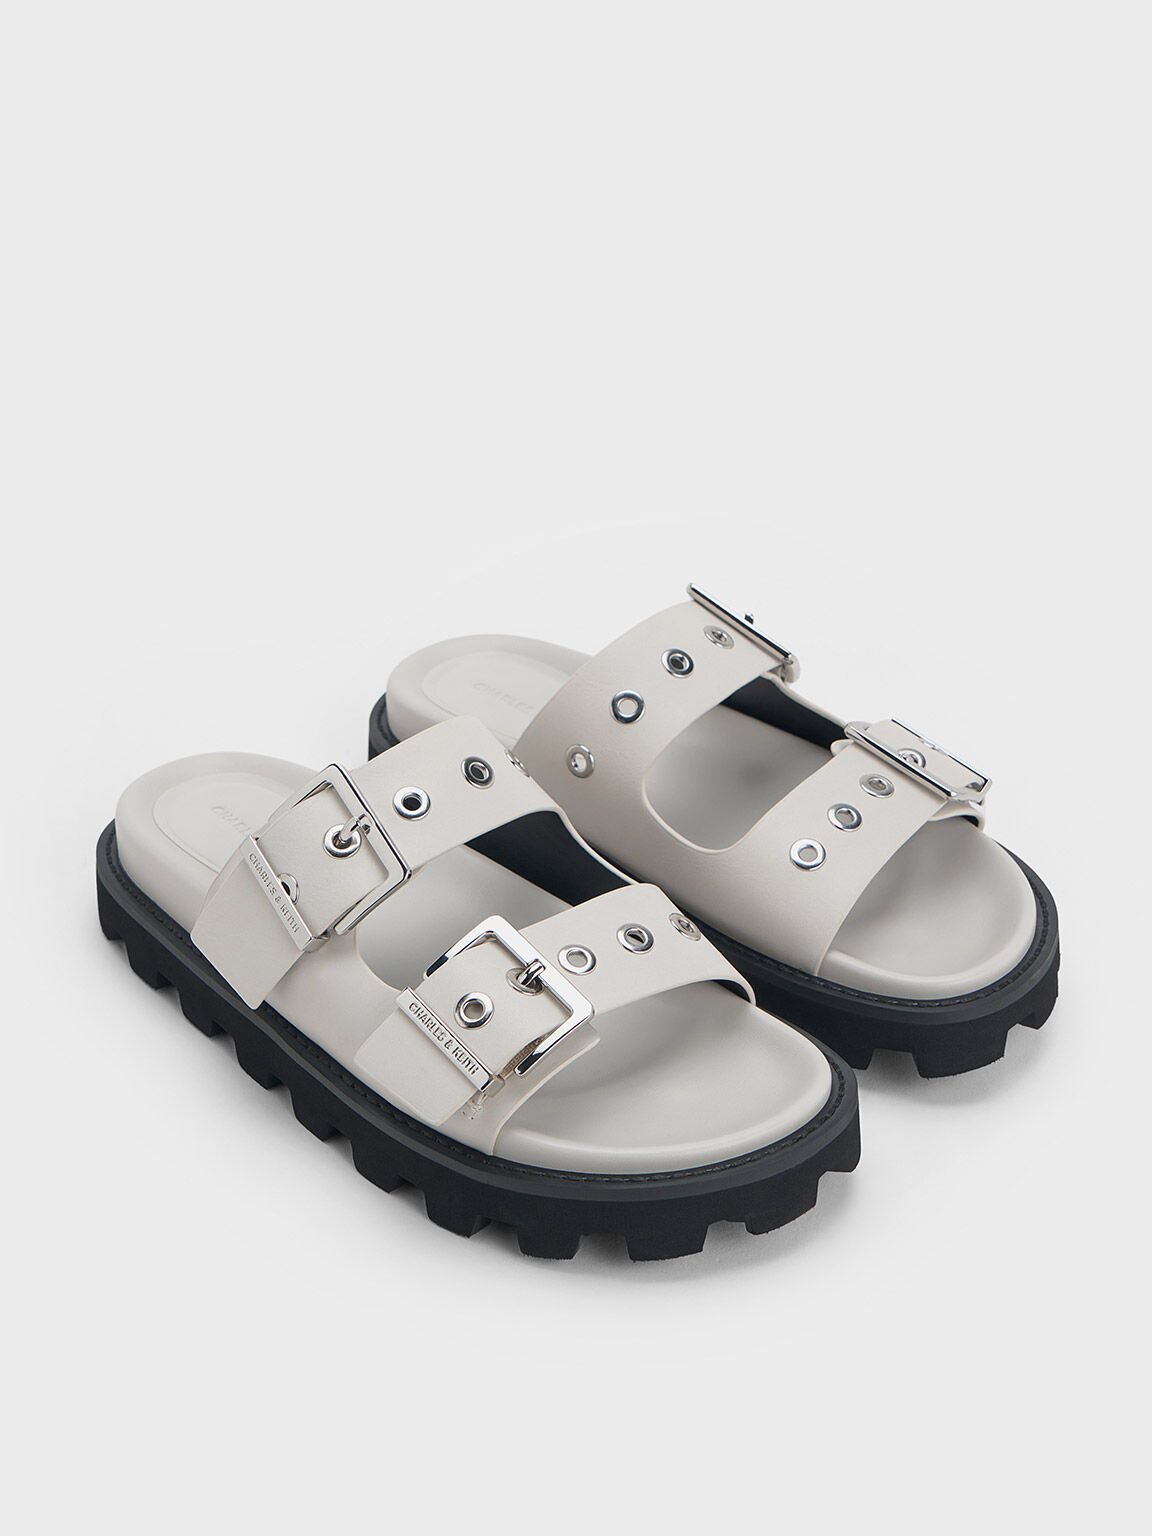 Almost Perfect' Double Strap Sandal – Portland Leather